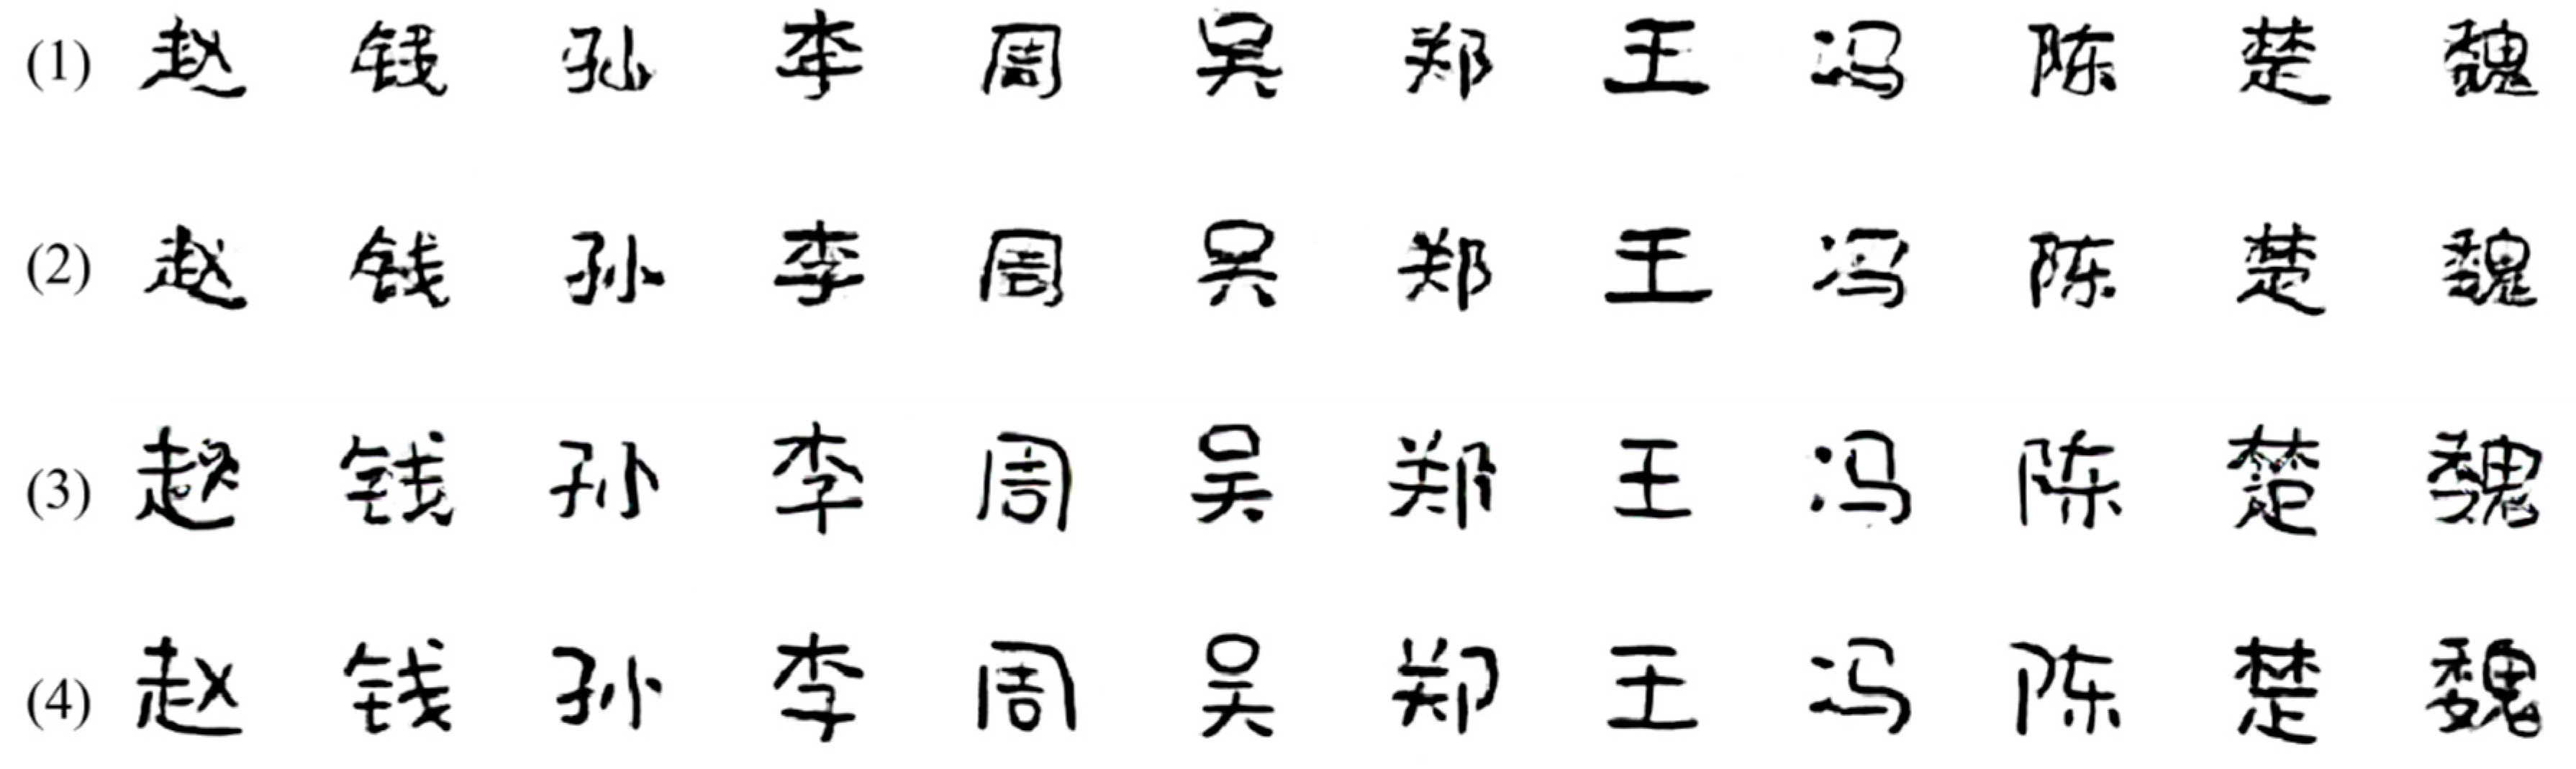 modern chinese fonts